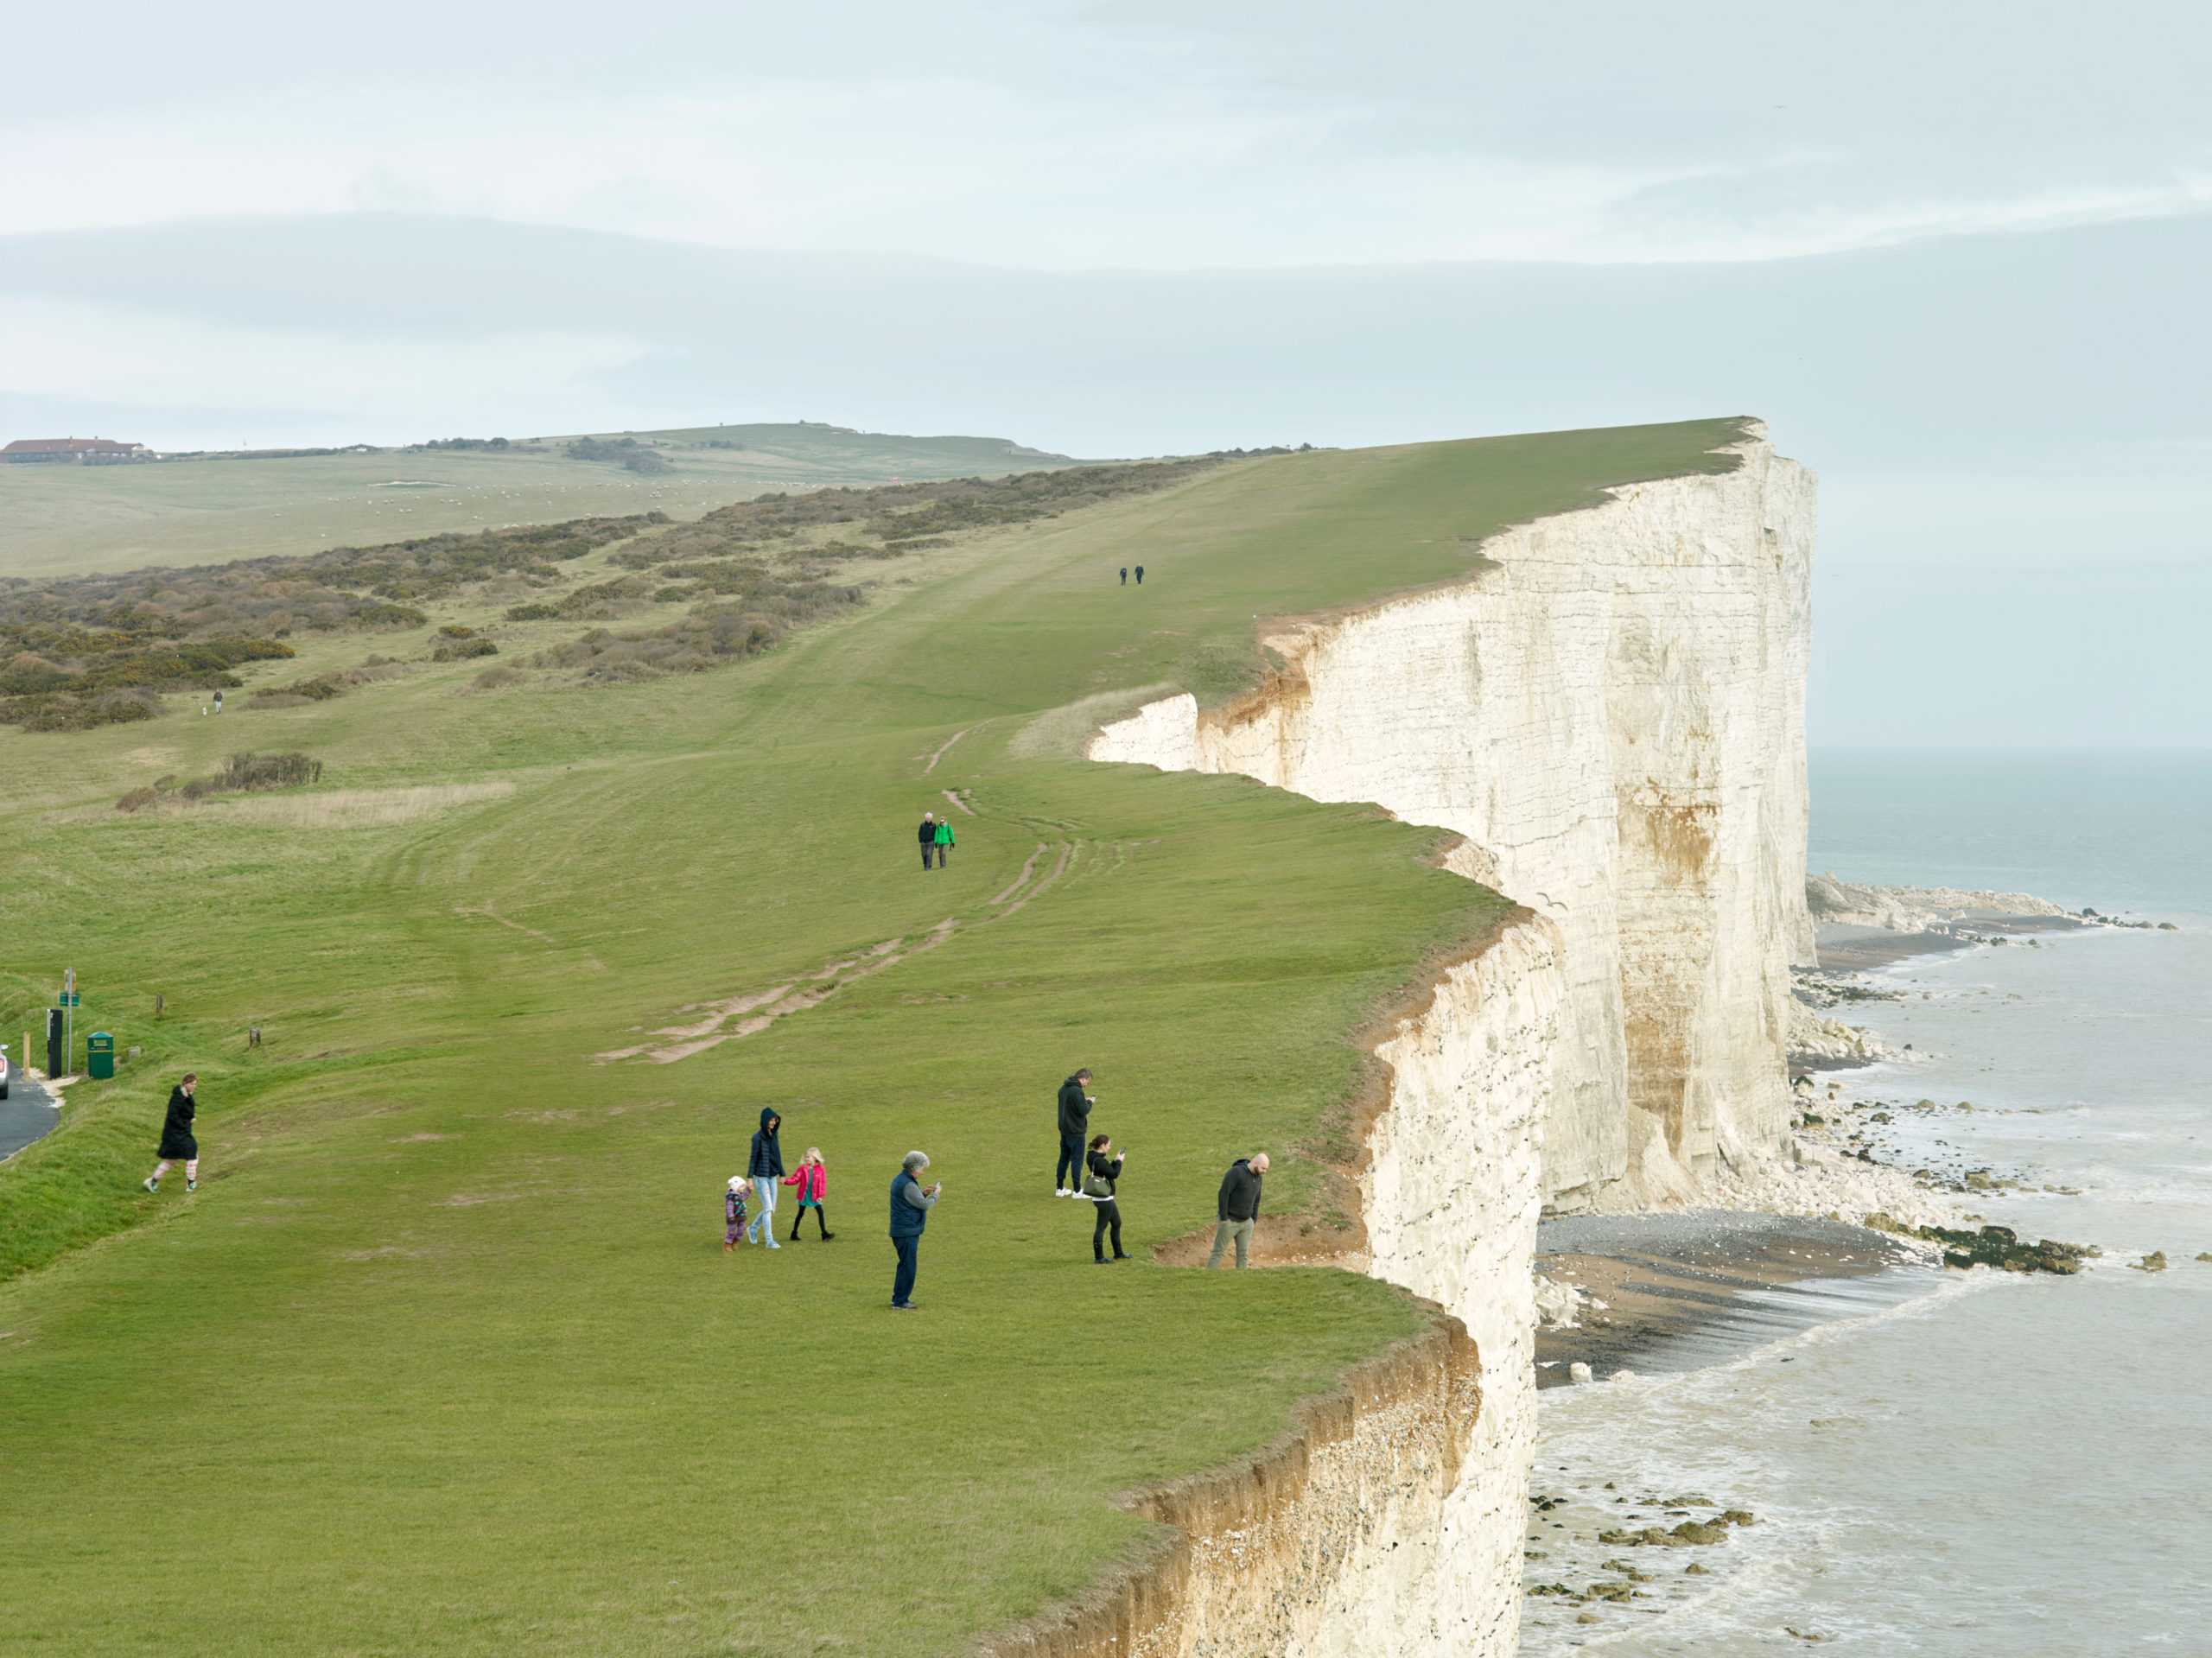 Simon Roberts, Beachy Head, Seven Sisters Country Park, East Sussex, 14 March 2017, 152 x 182cm, Archival pigment print,© Simon Roberts